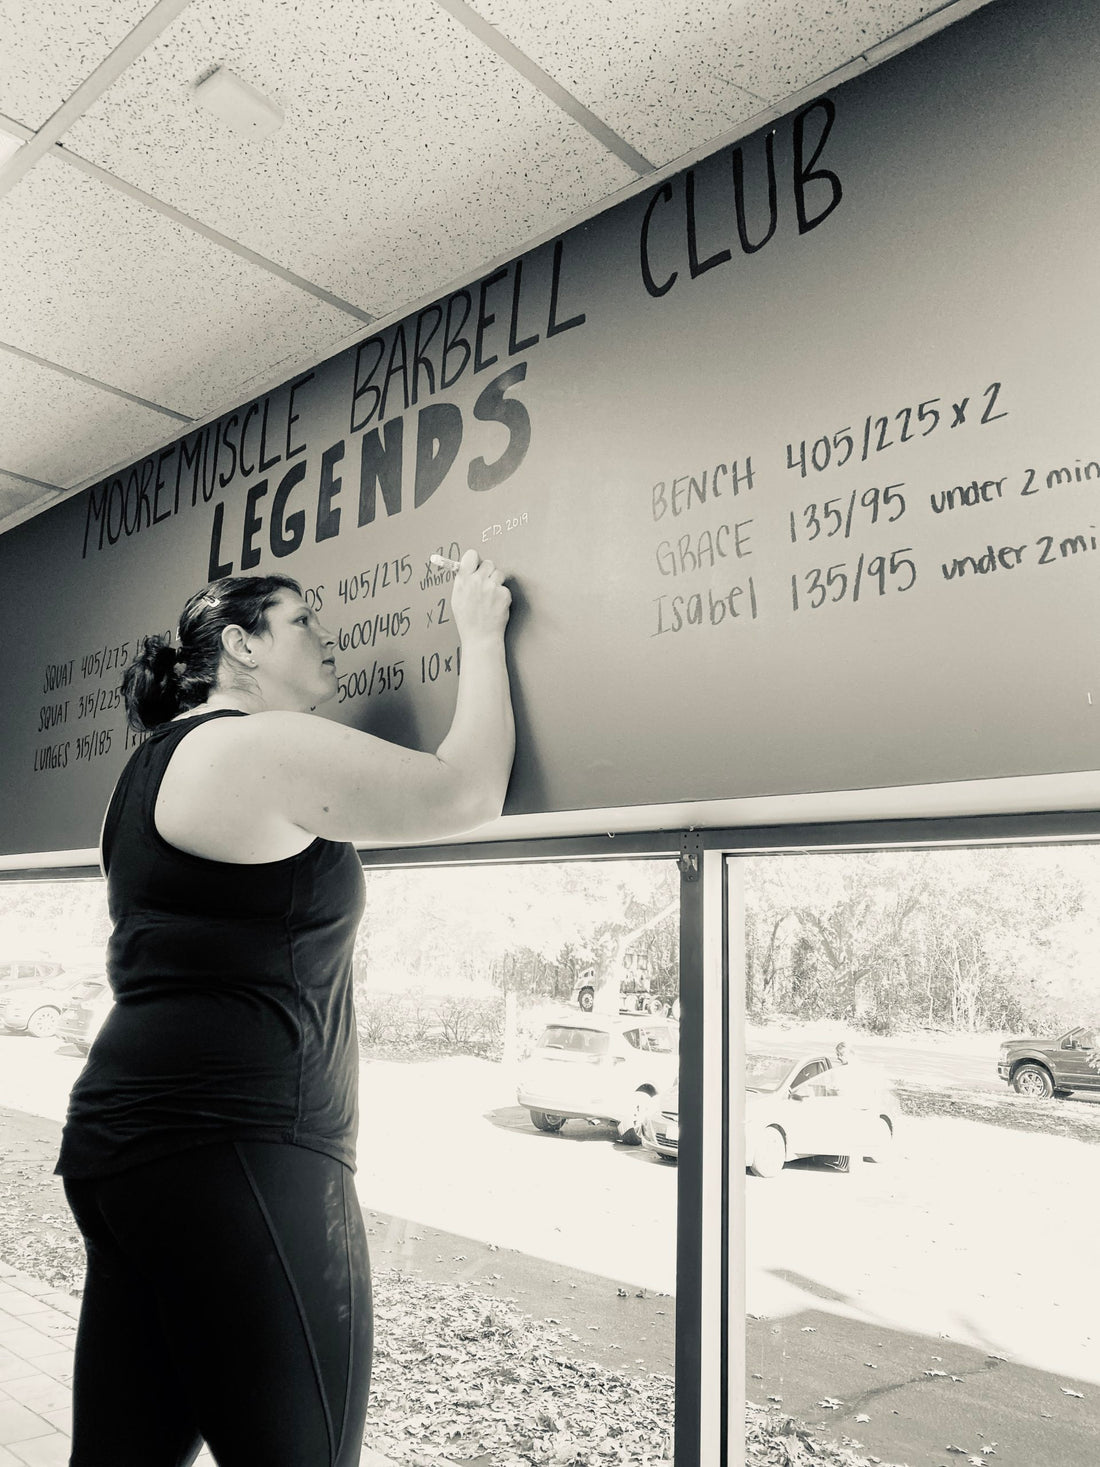 The Legends Wall